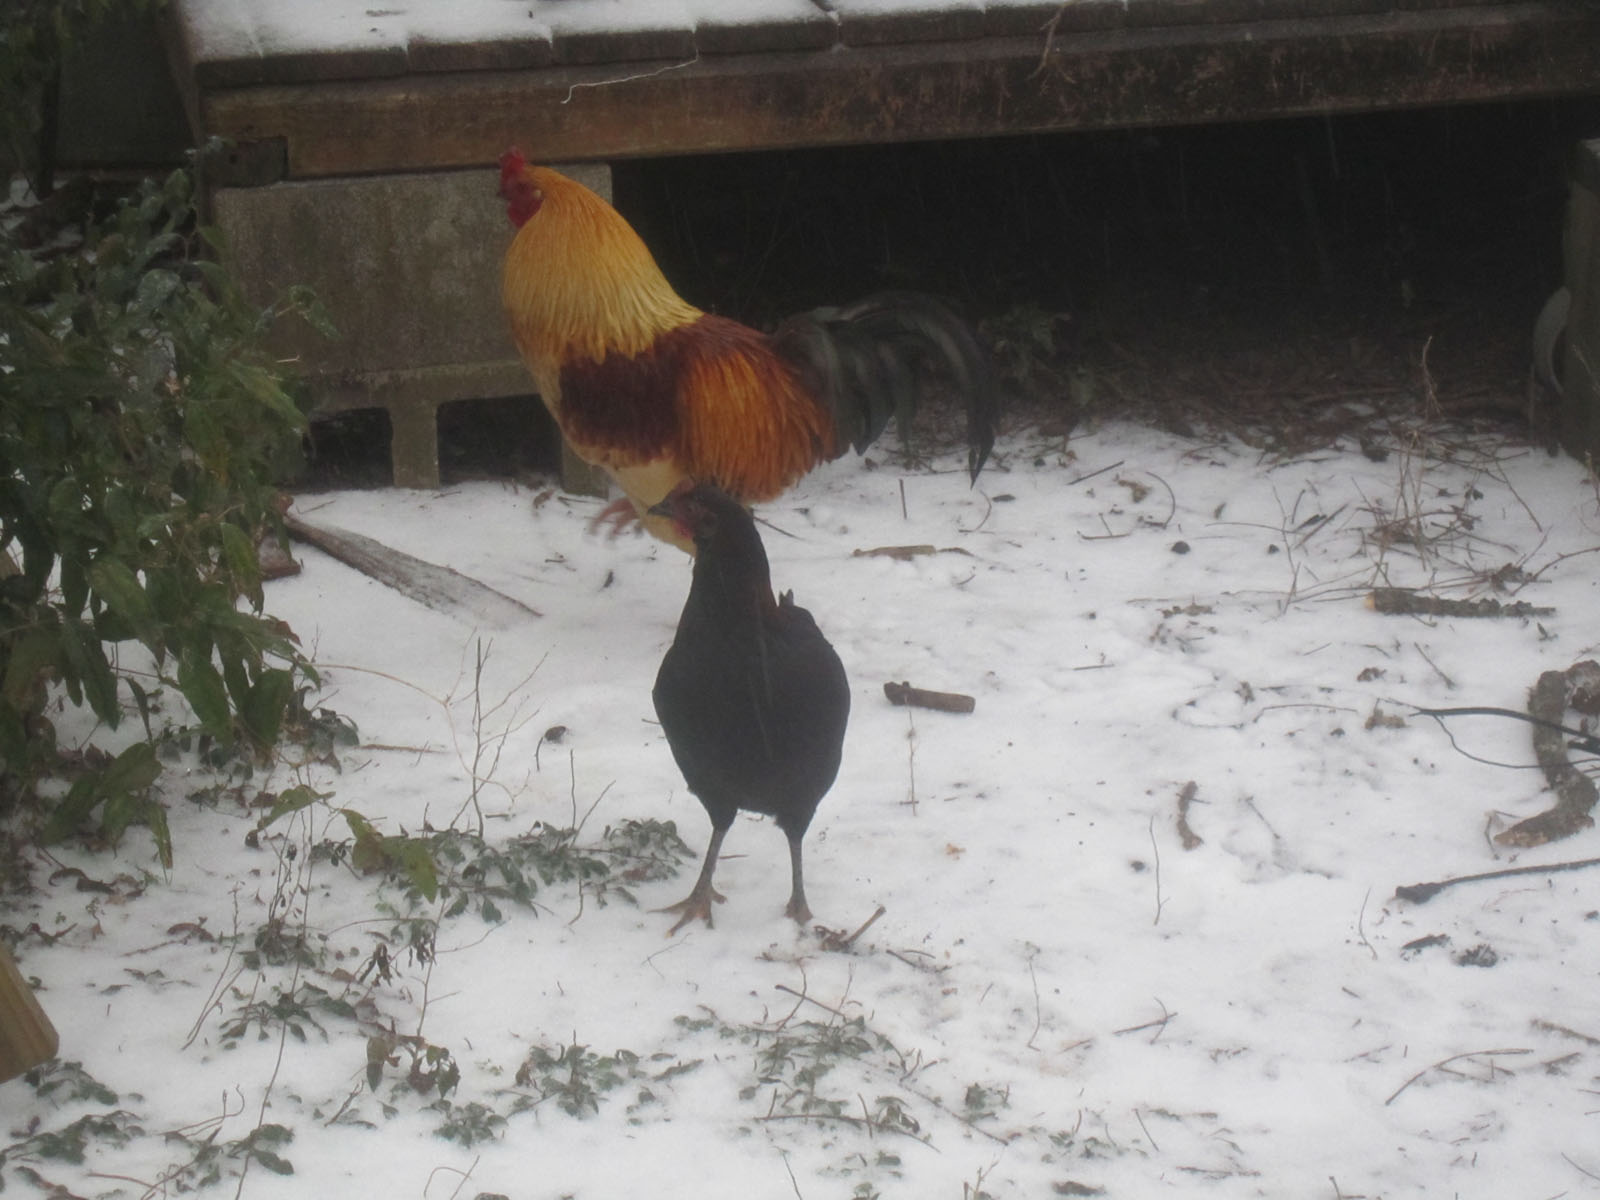 Speedy the Rooster and a hen